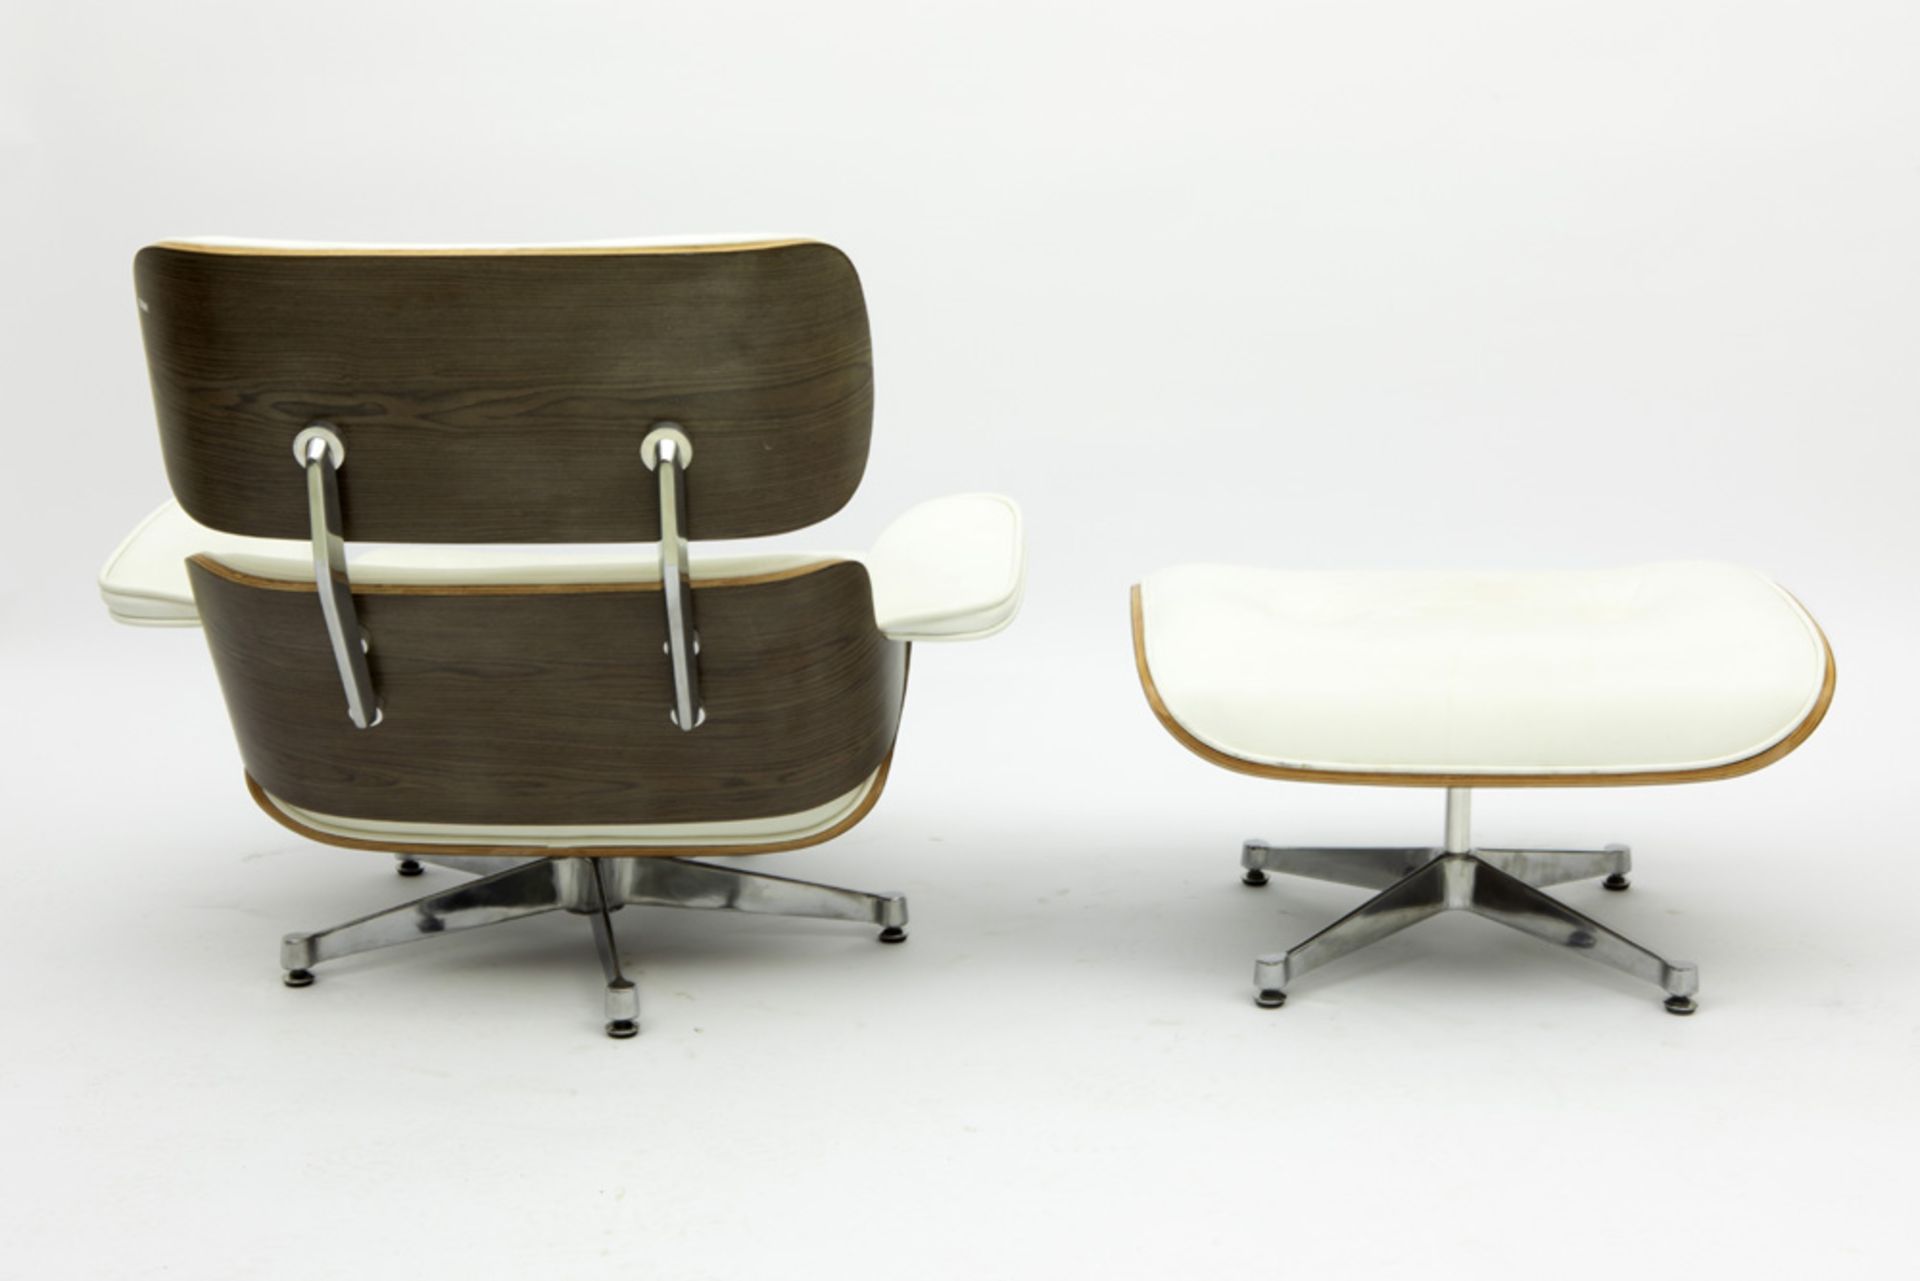 set of lounge chair and ottoman after the famous design by Charles & Ray Eames in white leather, - Image 3 of 3